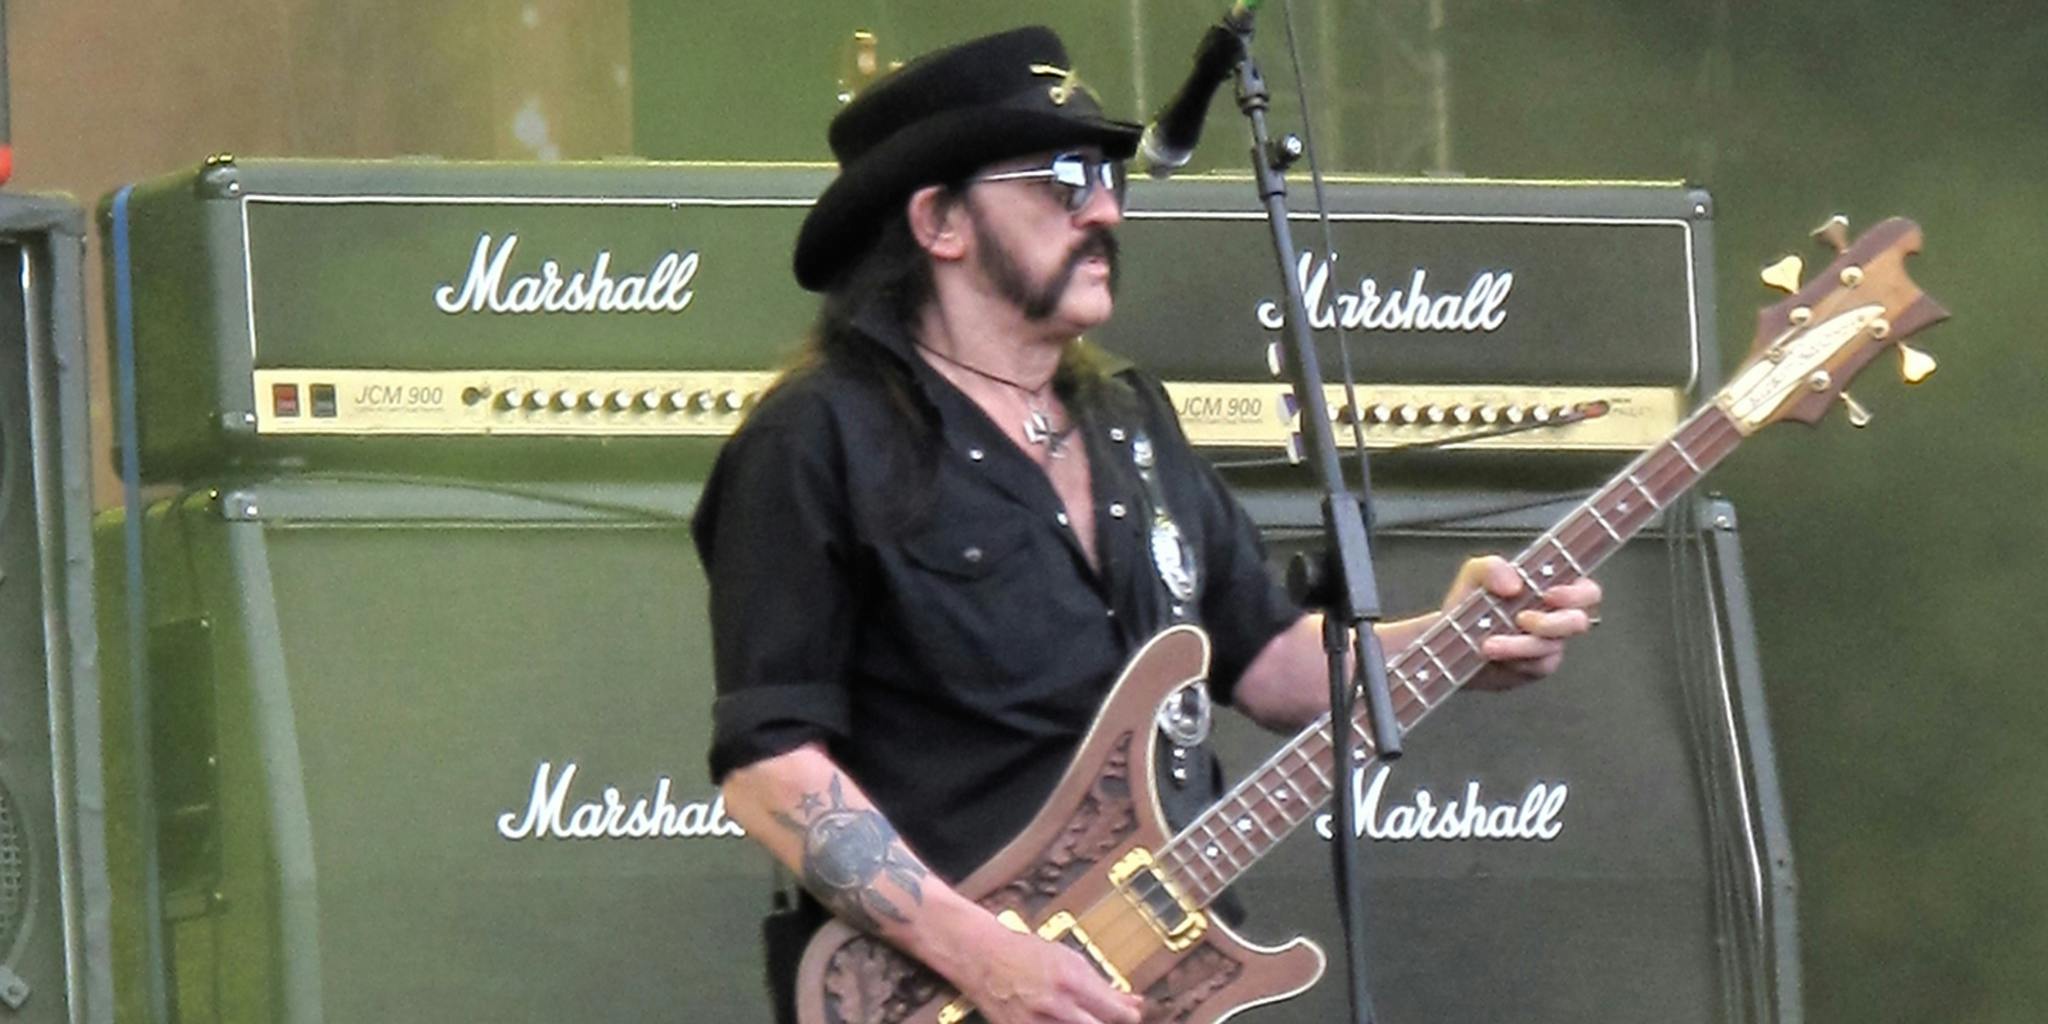 You can now get official Motorhead vibrators, if that’s a thing you want